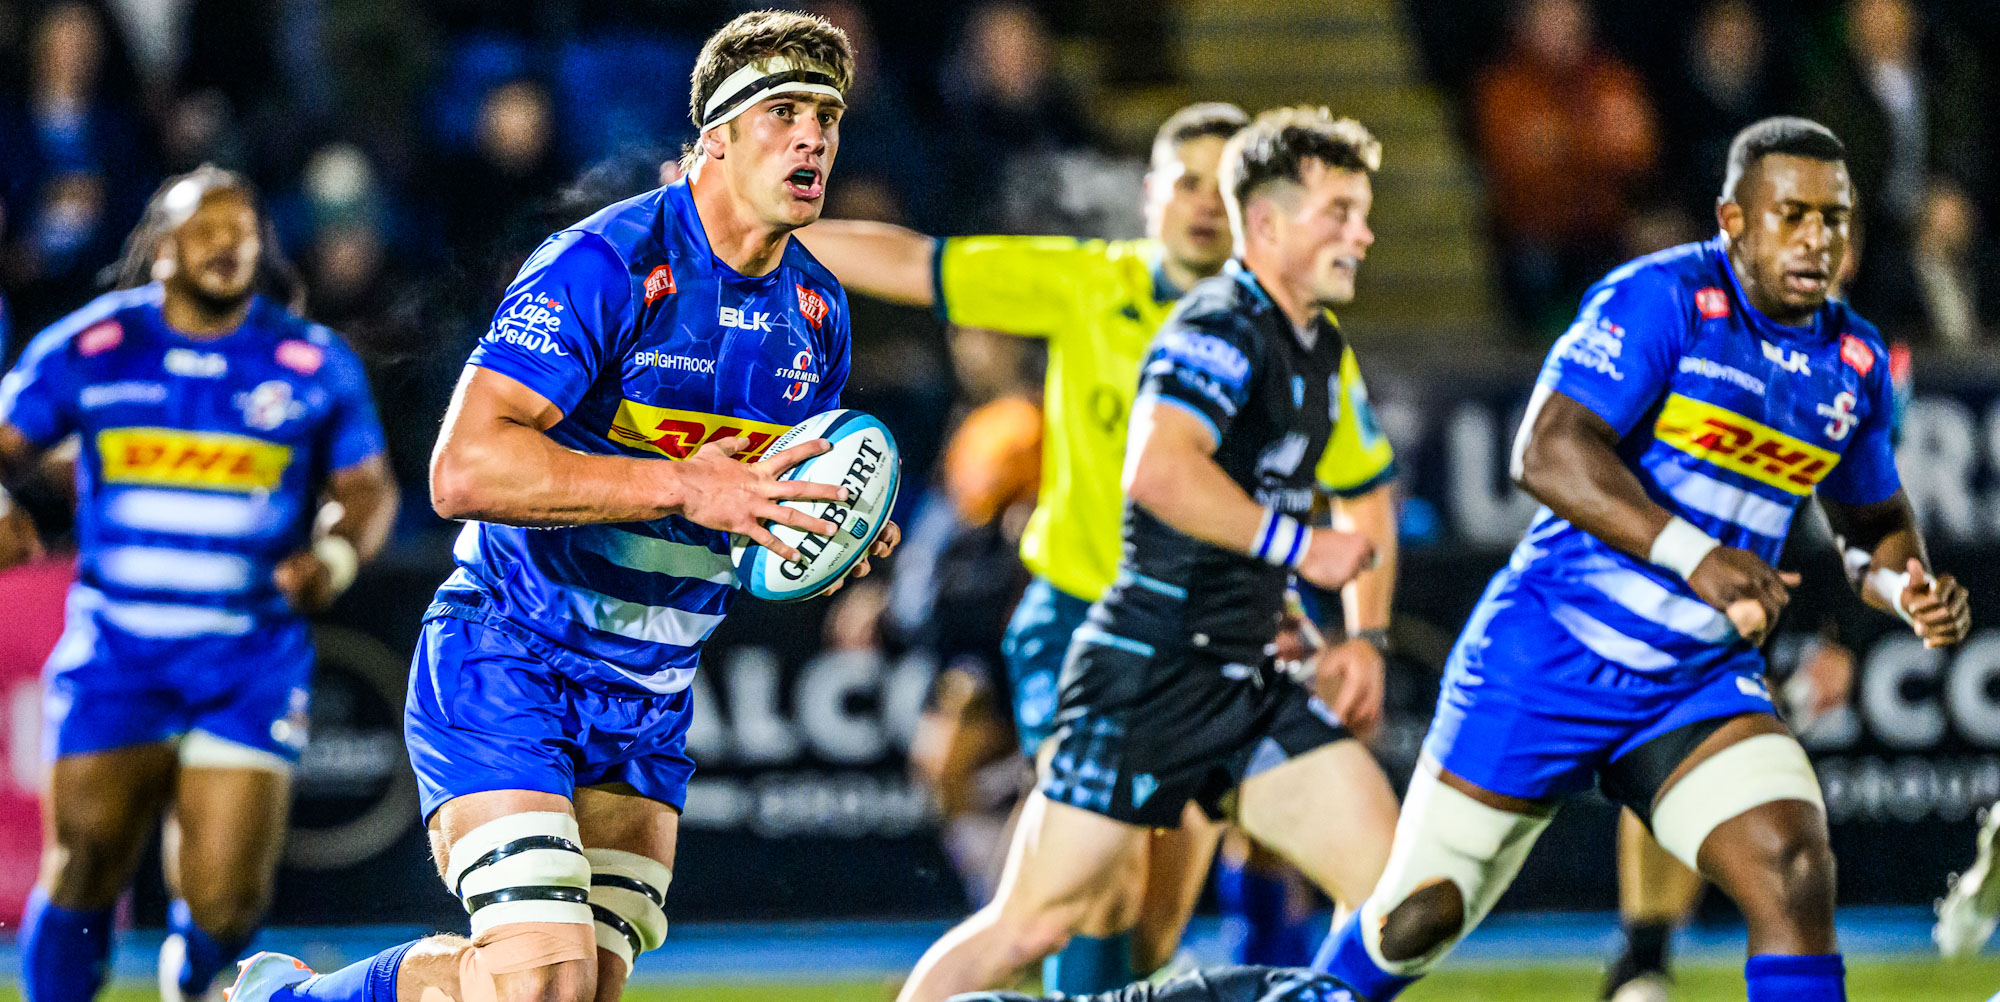 Ben-Jason Dixon on the charge the last time the DHL Stormers faced the Glasgow Warriors.